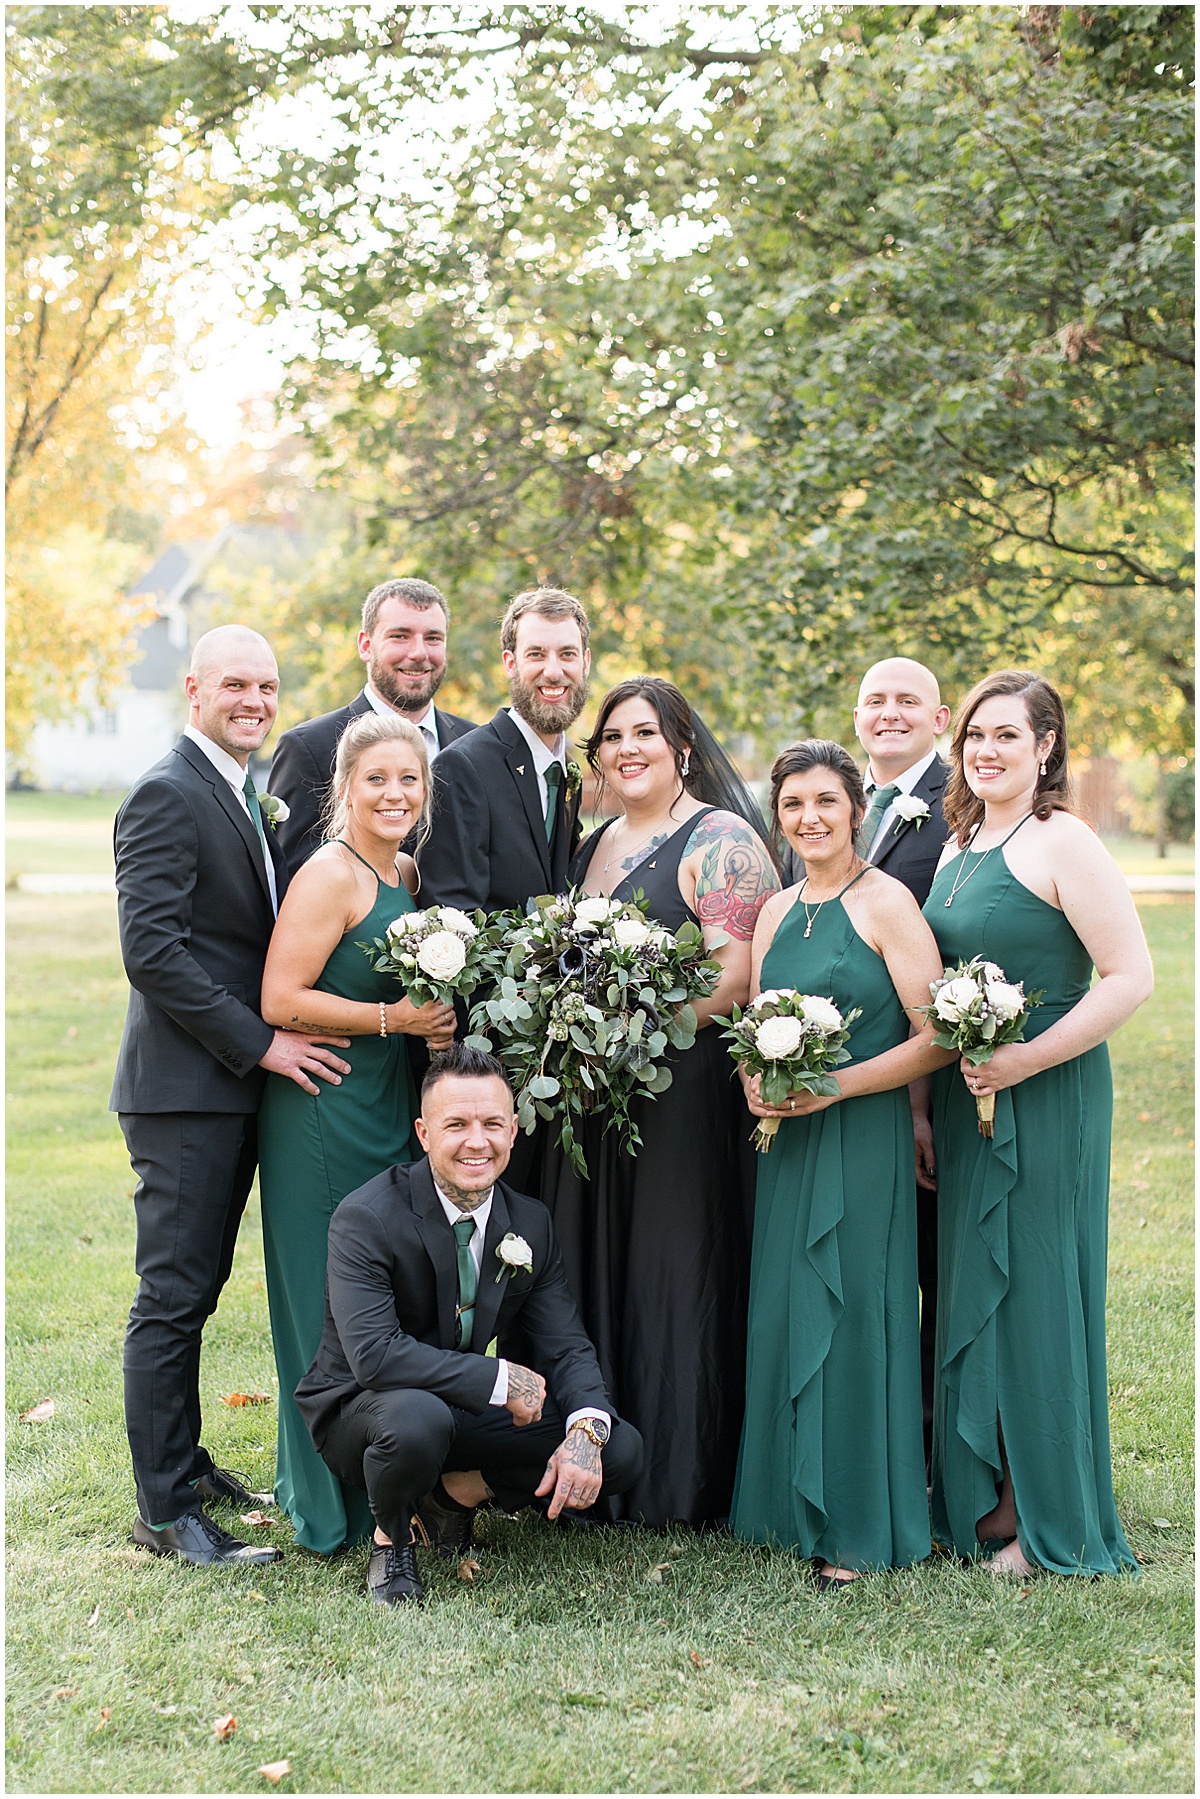 Bridal party ready for eMbers Venue wedding in Rensselaer, Indiana with a bride wearing black by Victoria Rayburn Photography